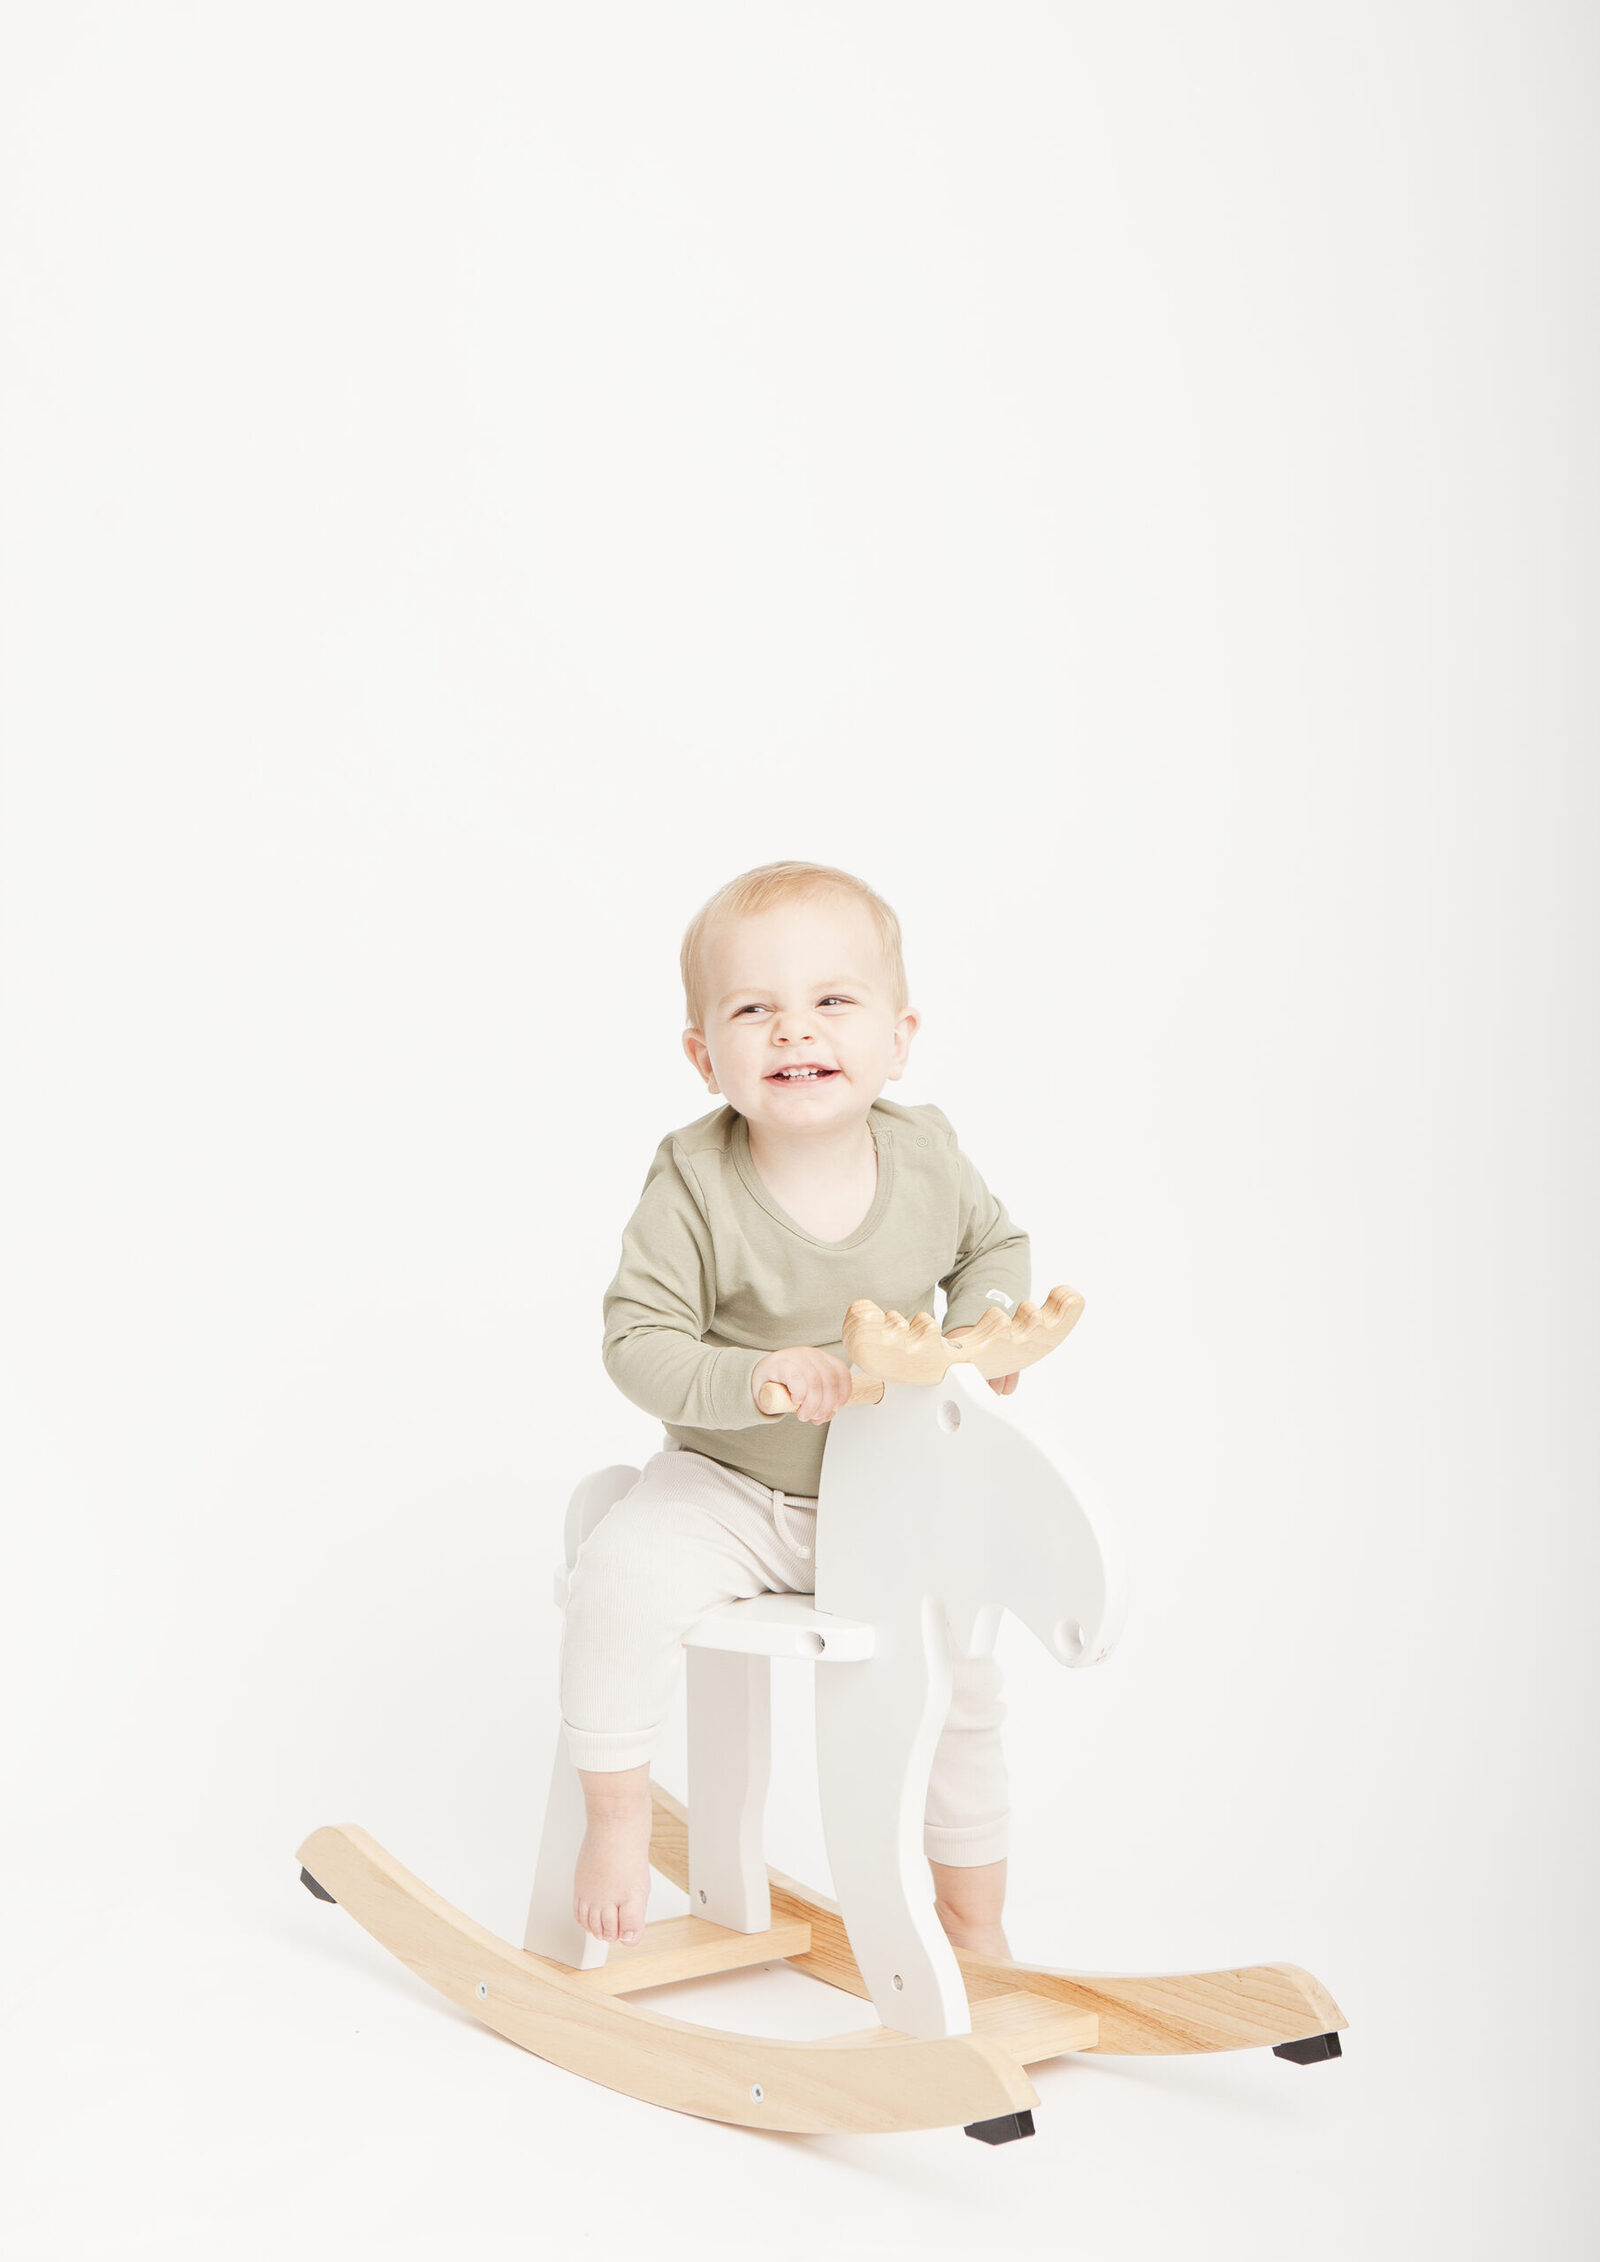 portrait of a boy on a rocking horse, minimal studio photography with white background by petite feet photography in London